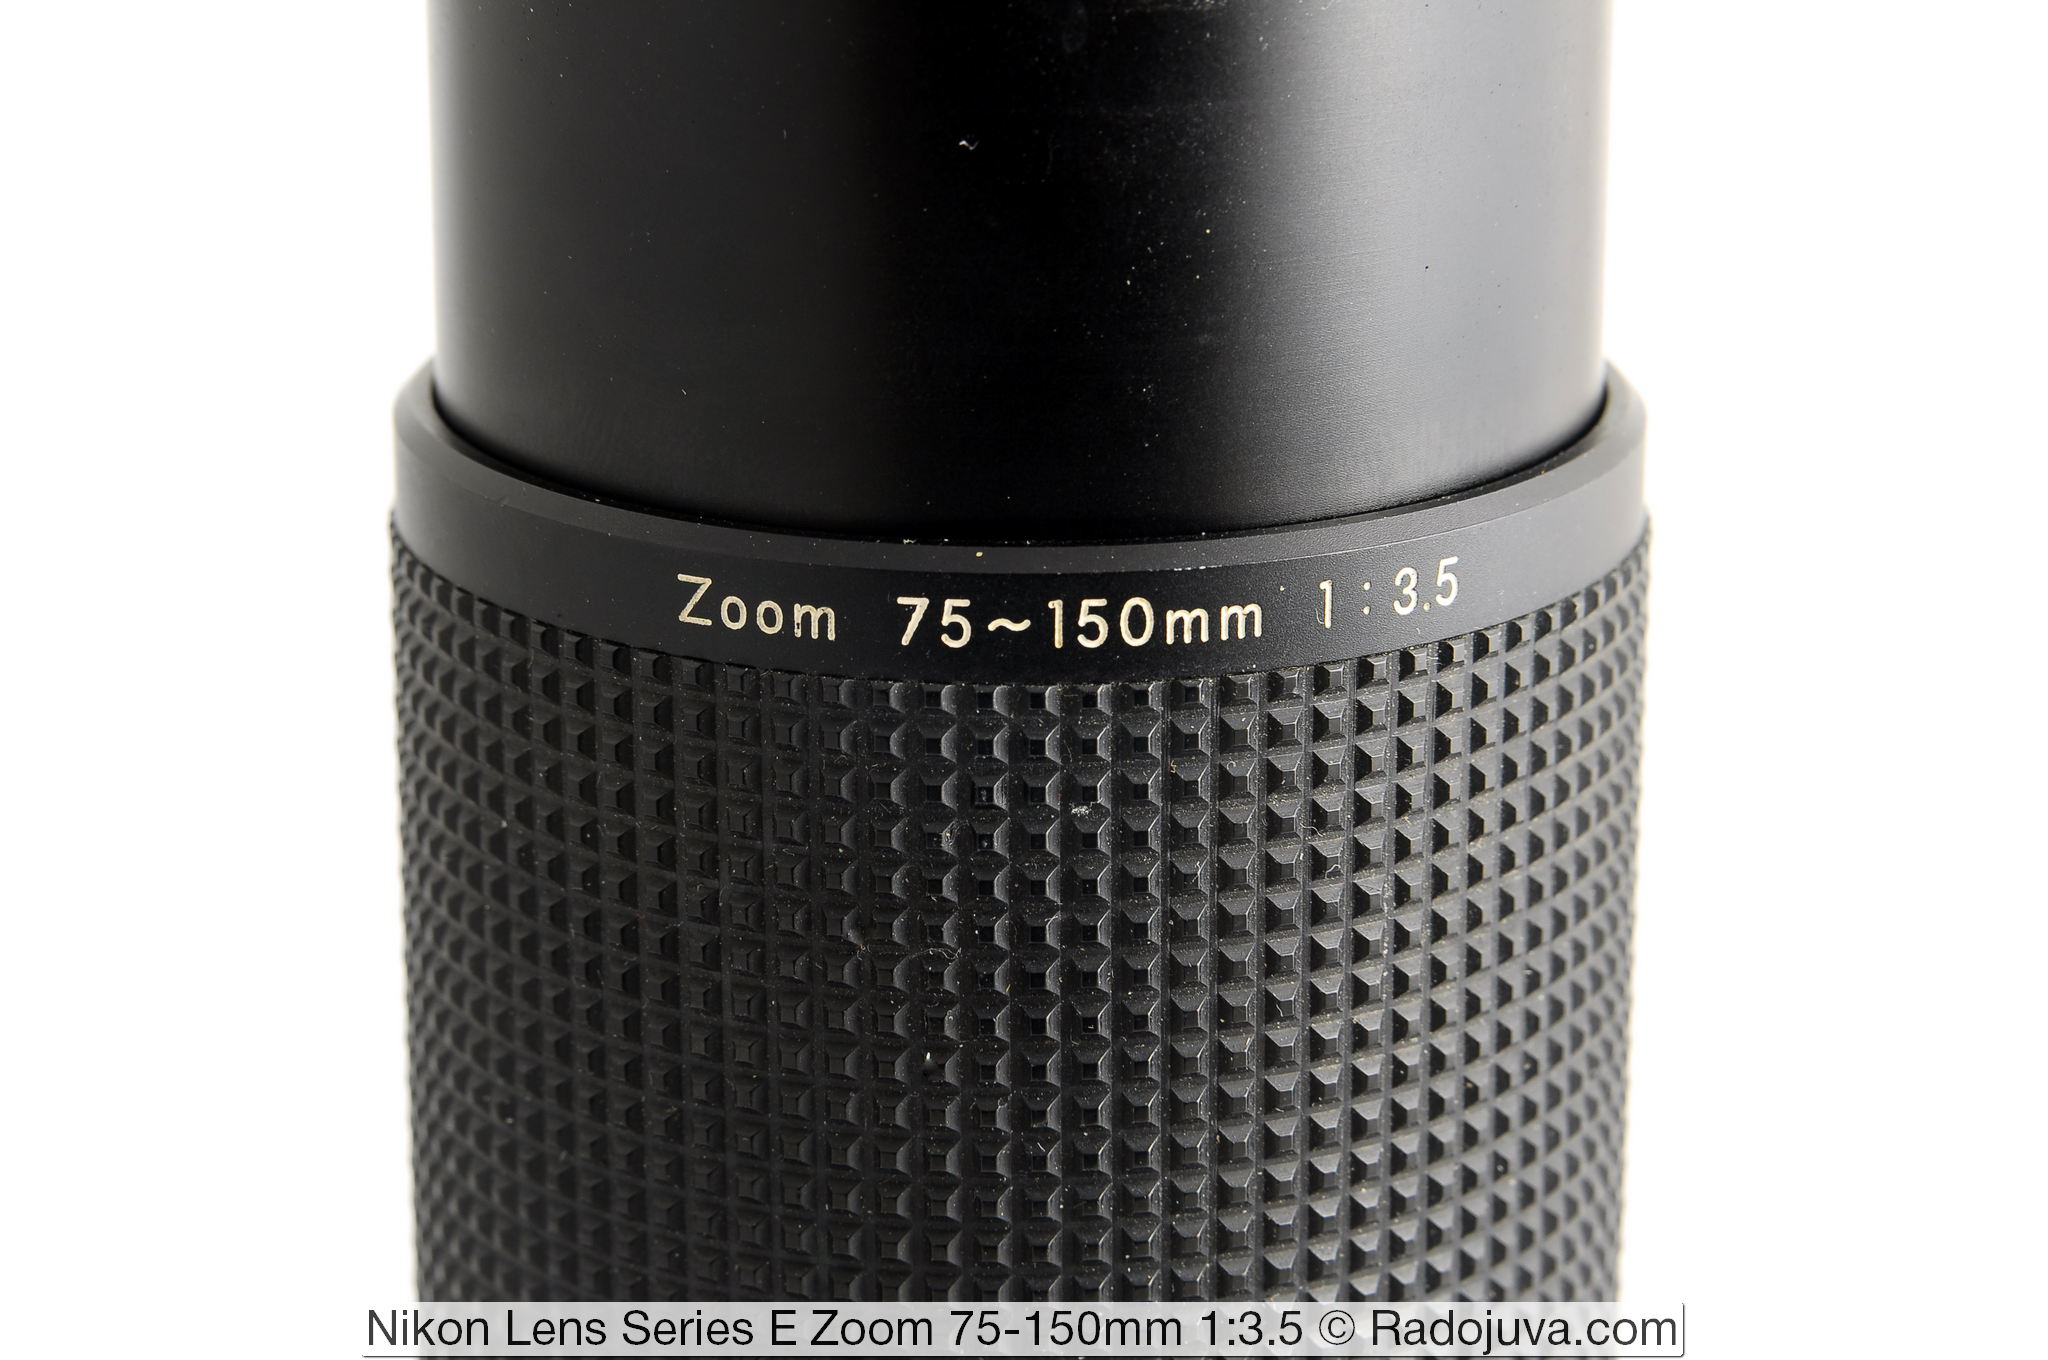 Review of the Nikon Lens Series E Zoom 75-150mm 1: 3.5 (MKII) | Happy